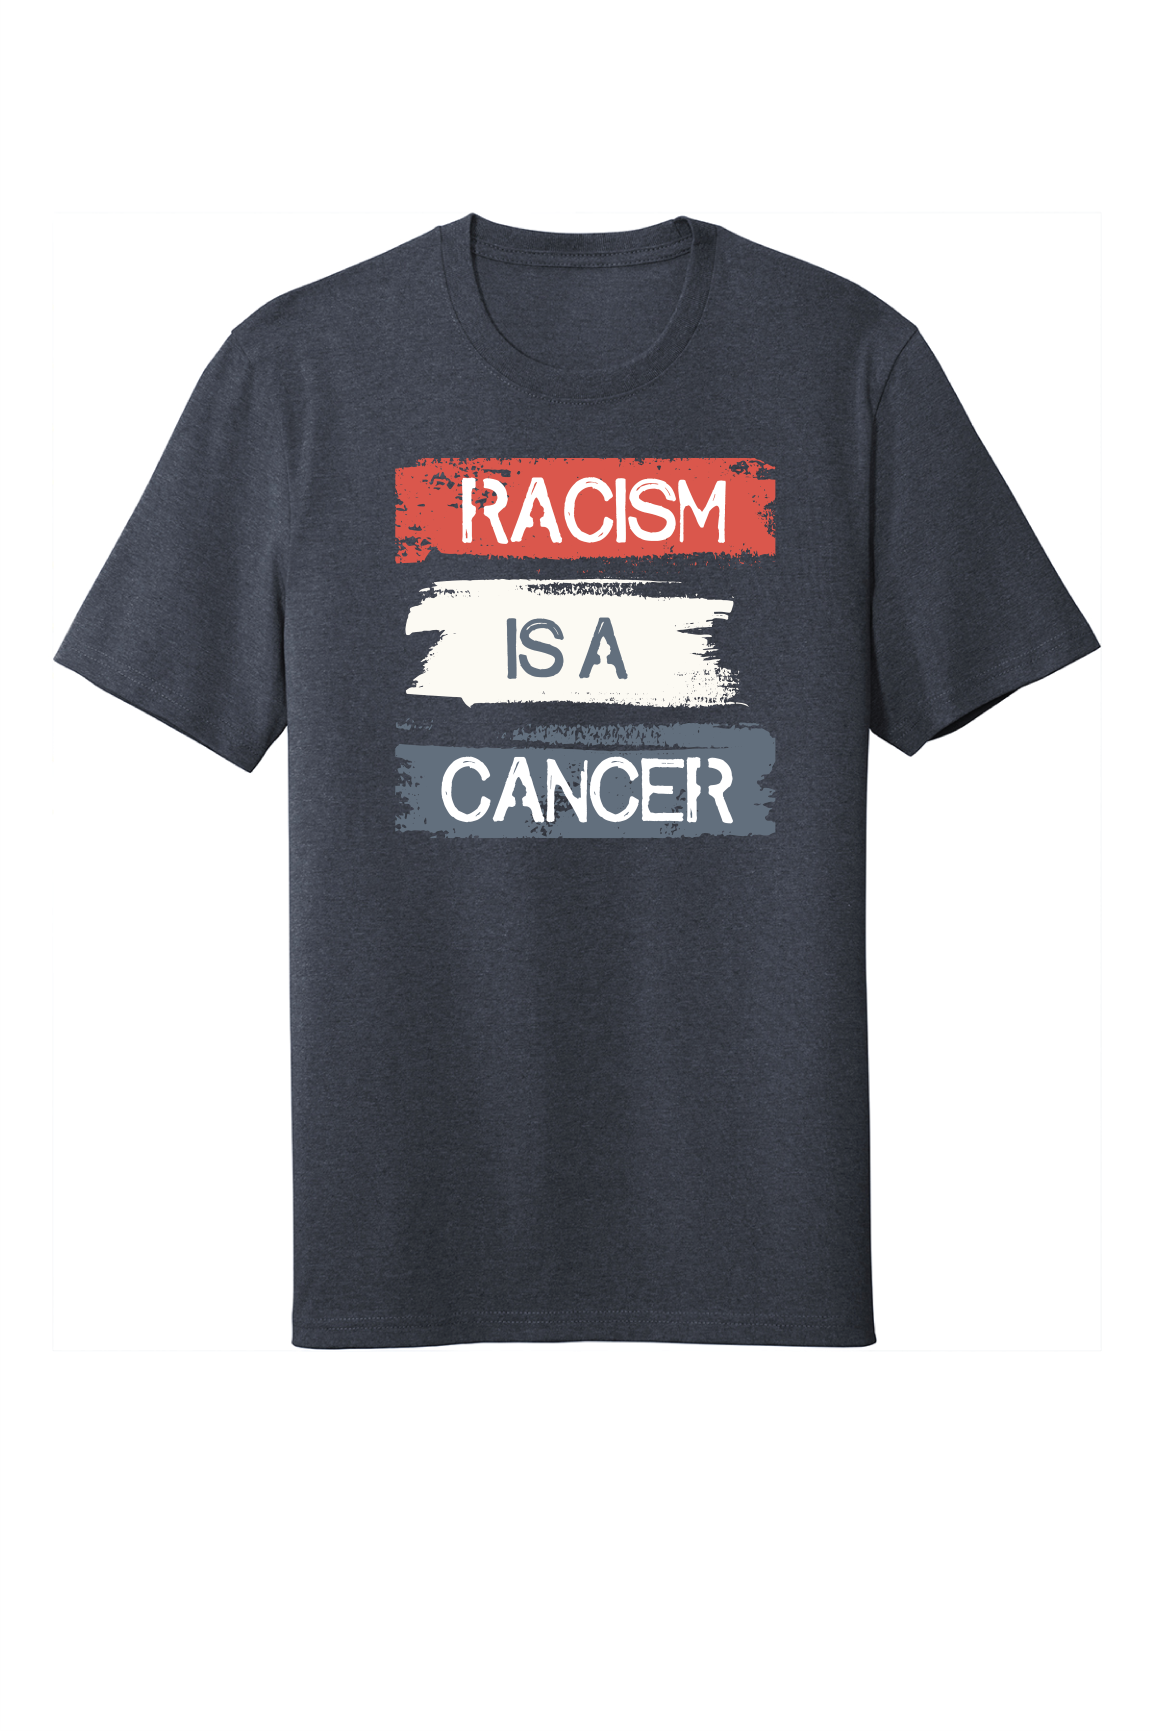 RACISM IS A CANCER 100% PROCEEDS DONATED